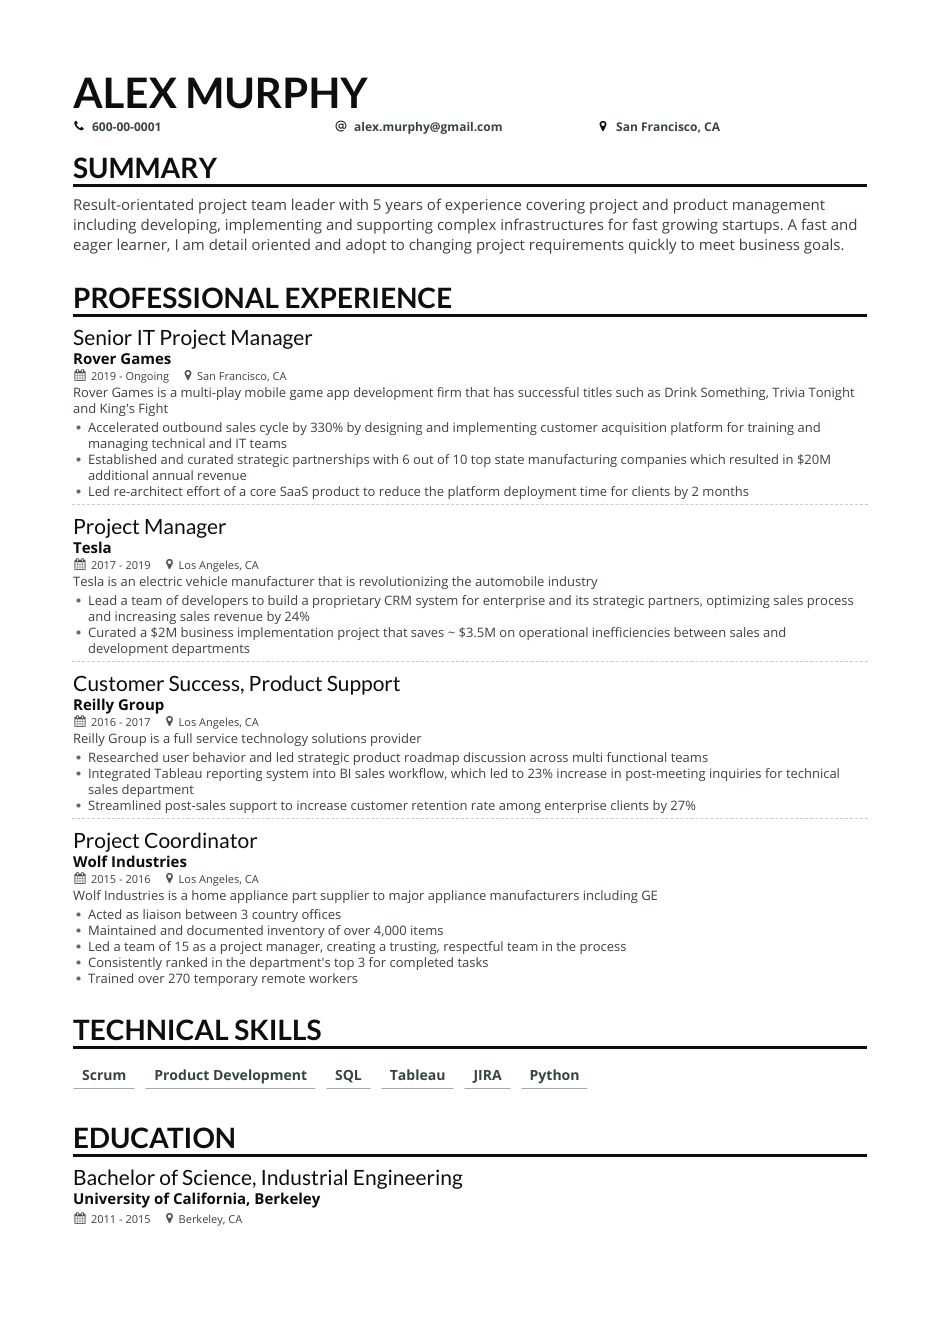 Construction Project Manager Resume Sample Doc 4 Job-winning Project Manager Resume Examples In 2021